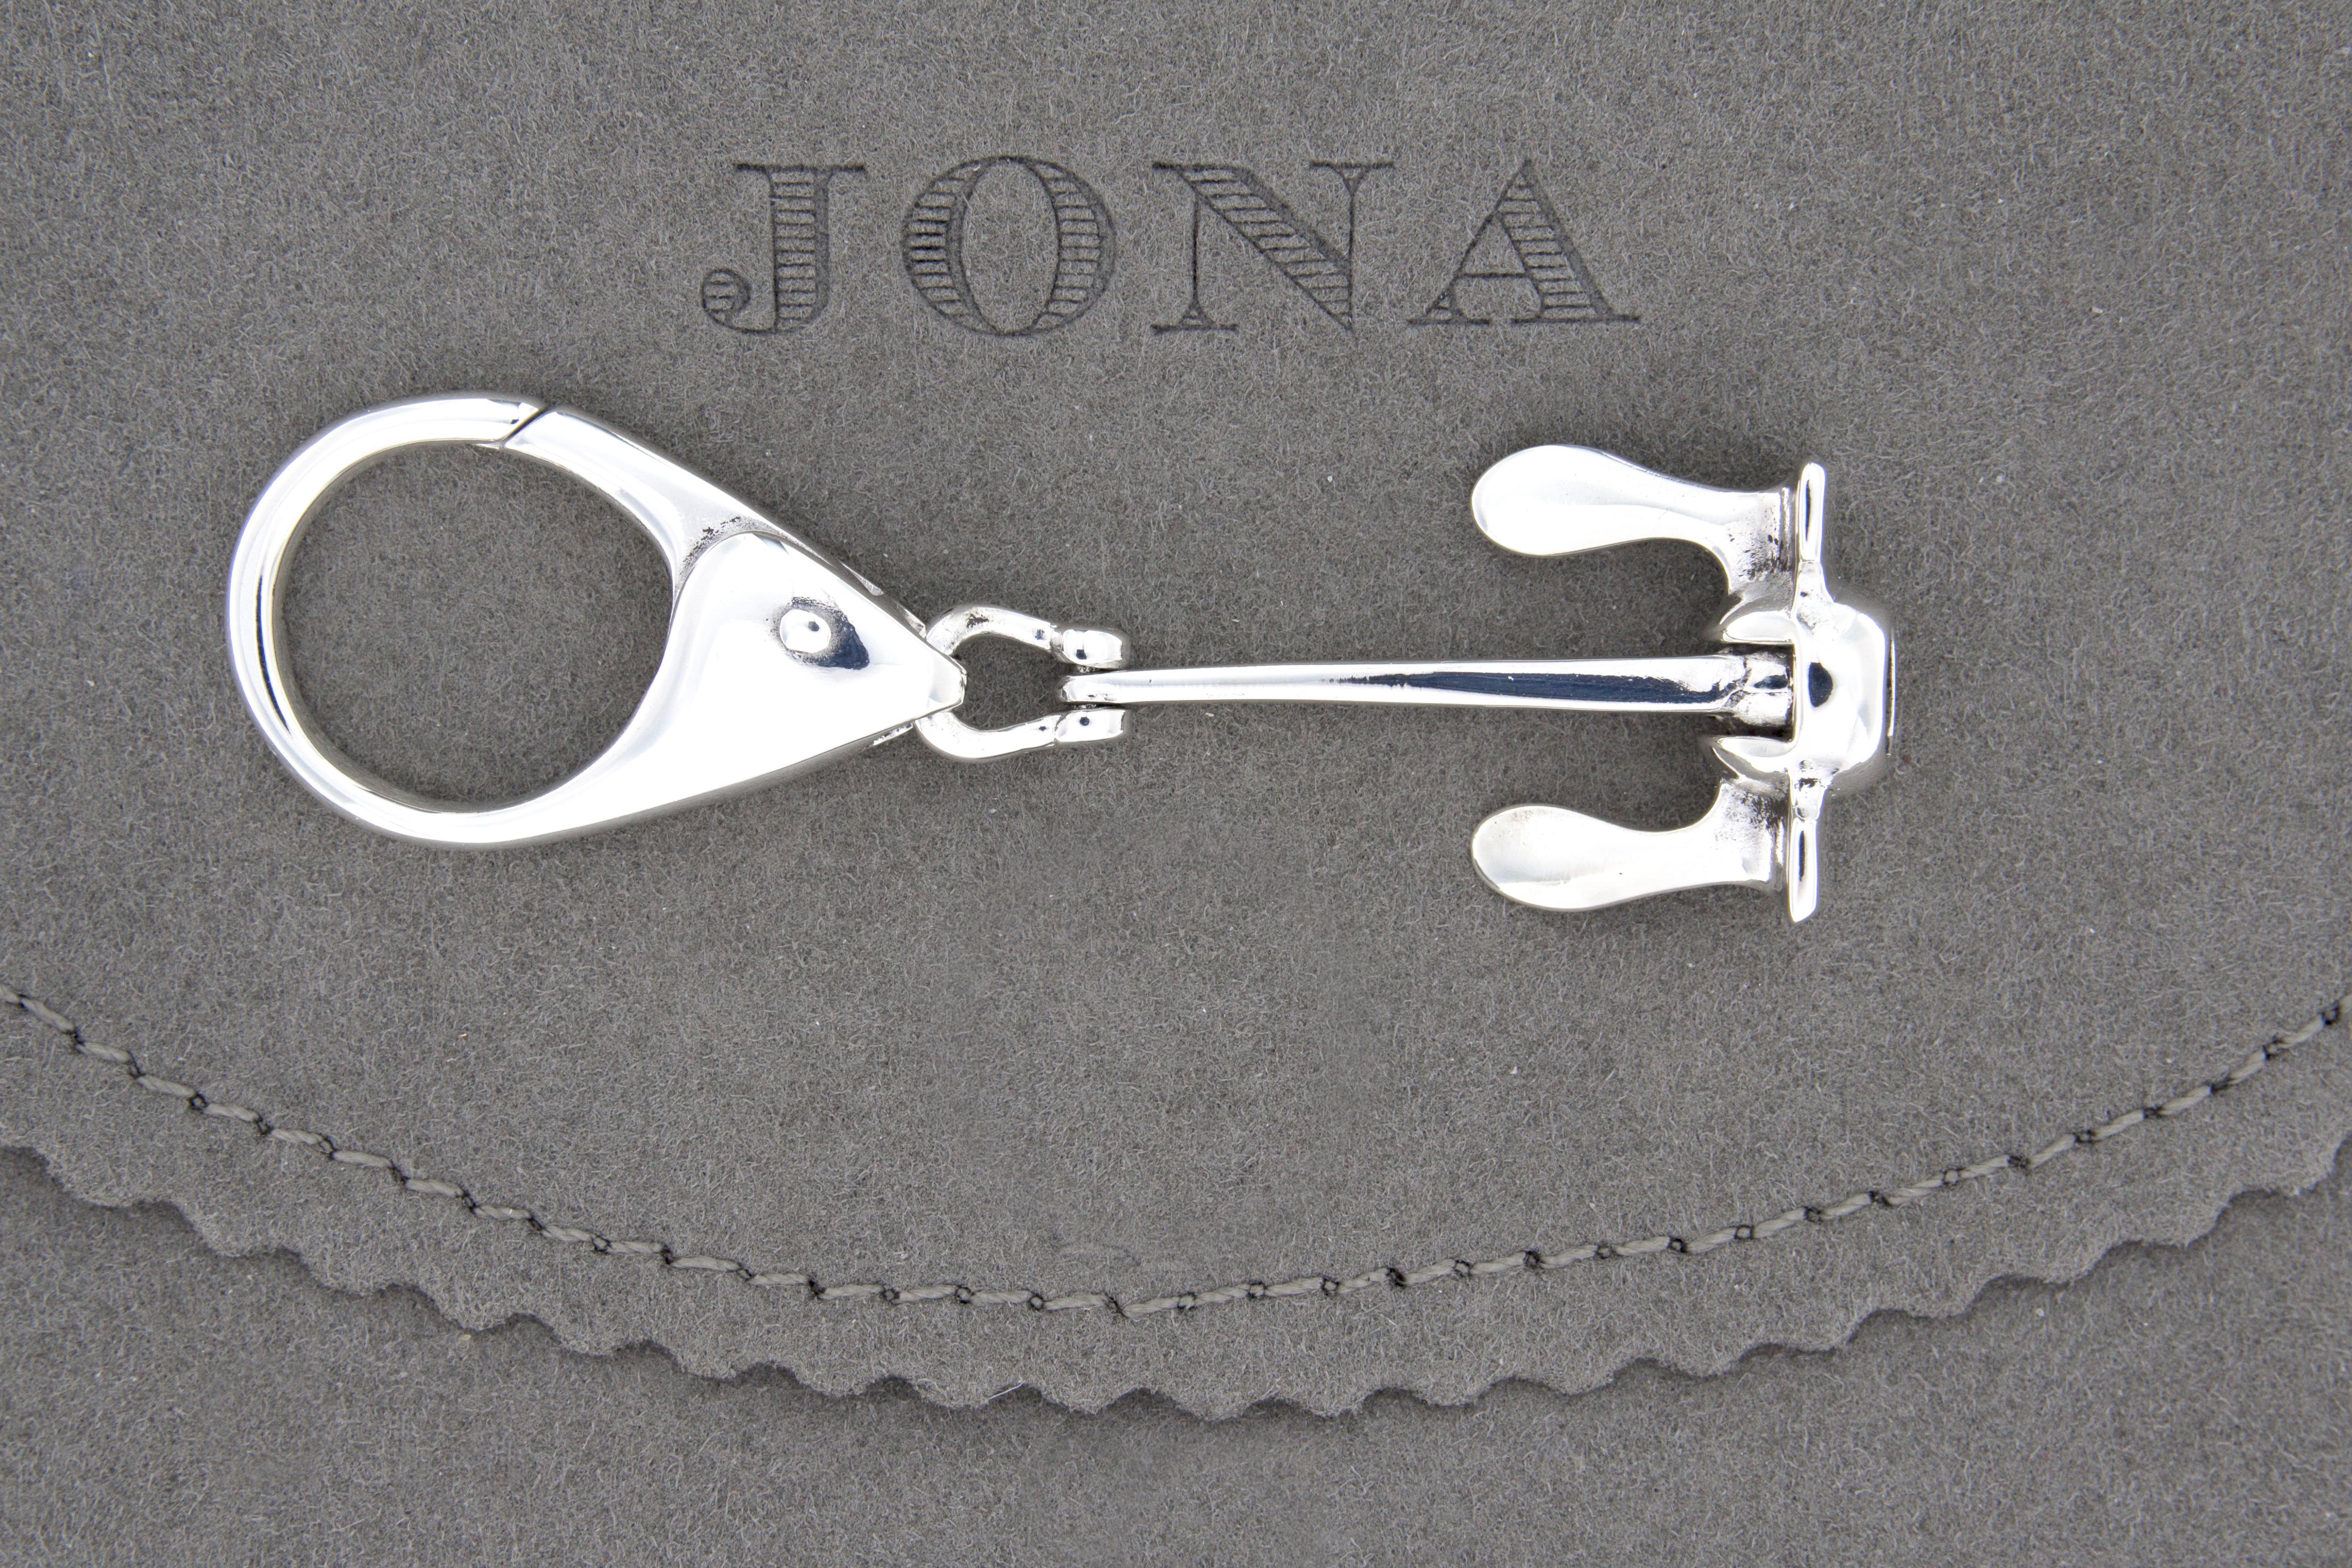 Alex Jona design collection, hand crafted in Italy, rhodium plated Sterling Silver Hall anchor key holder. The anchor moves up and down as a real Danforth anchor.
Anchor dimensions : L 1.82 in/ 46.37 mm x W 0.87 in/ 22.34 mm x Depth: 0.40 in/ 10.34